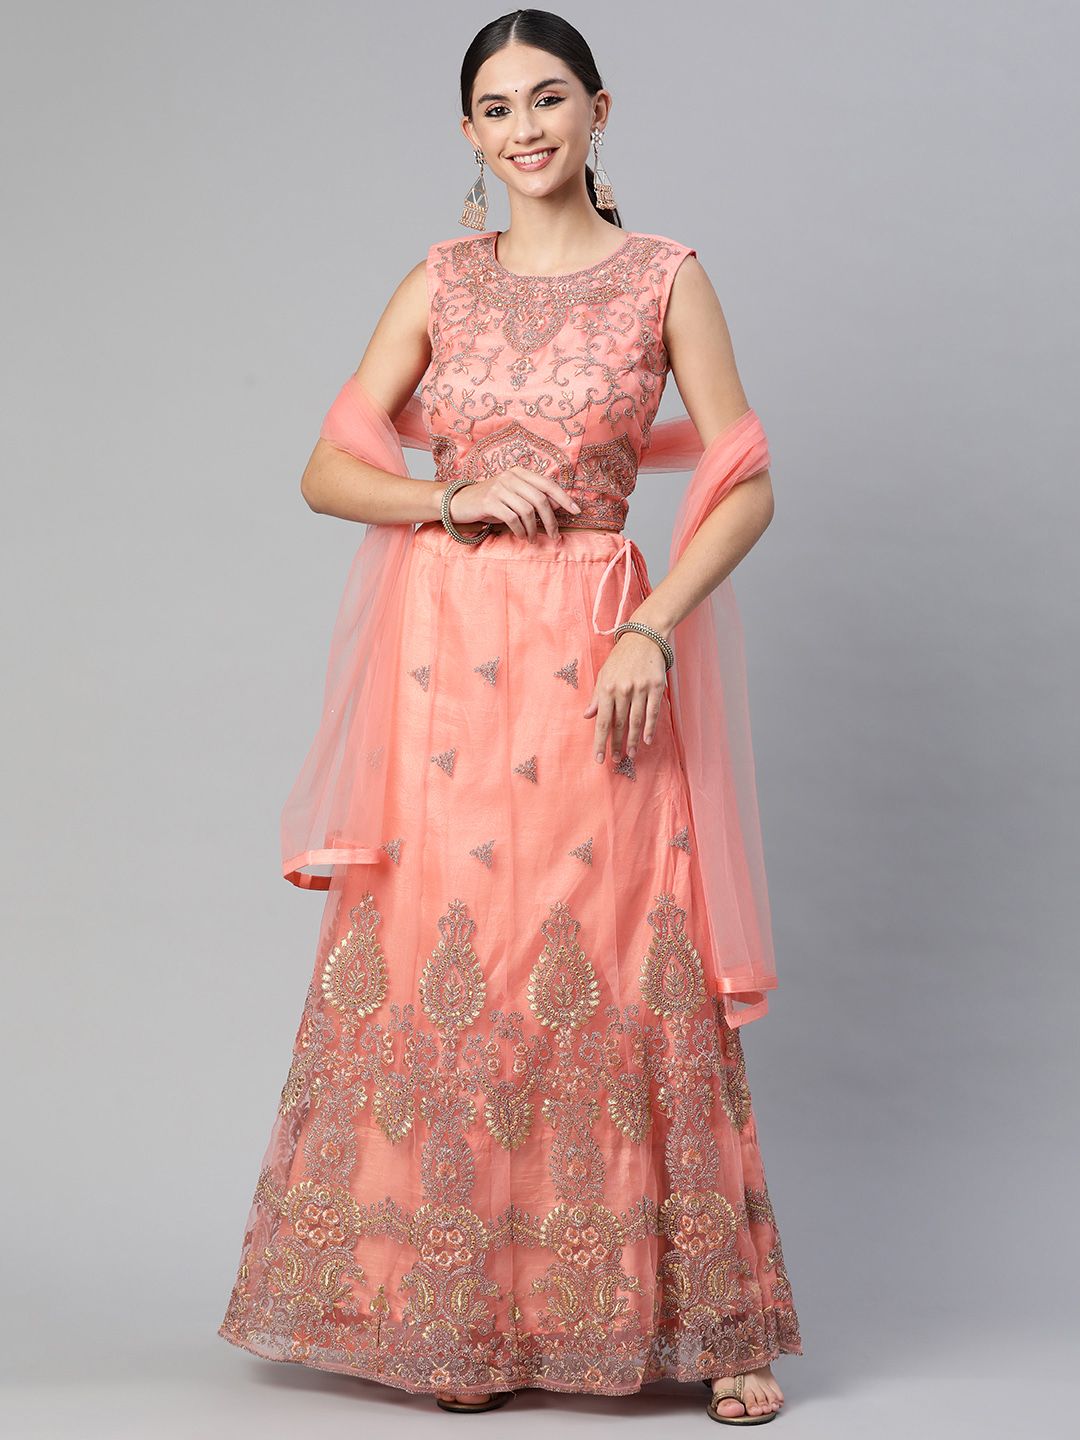 Readiprint Fashions Peach-Coloured & Golden Embroidered Unstitched Lehenga & Blouse With Price in India